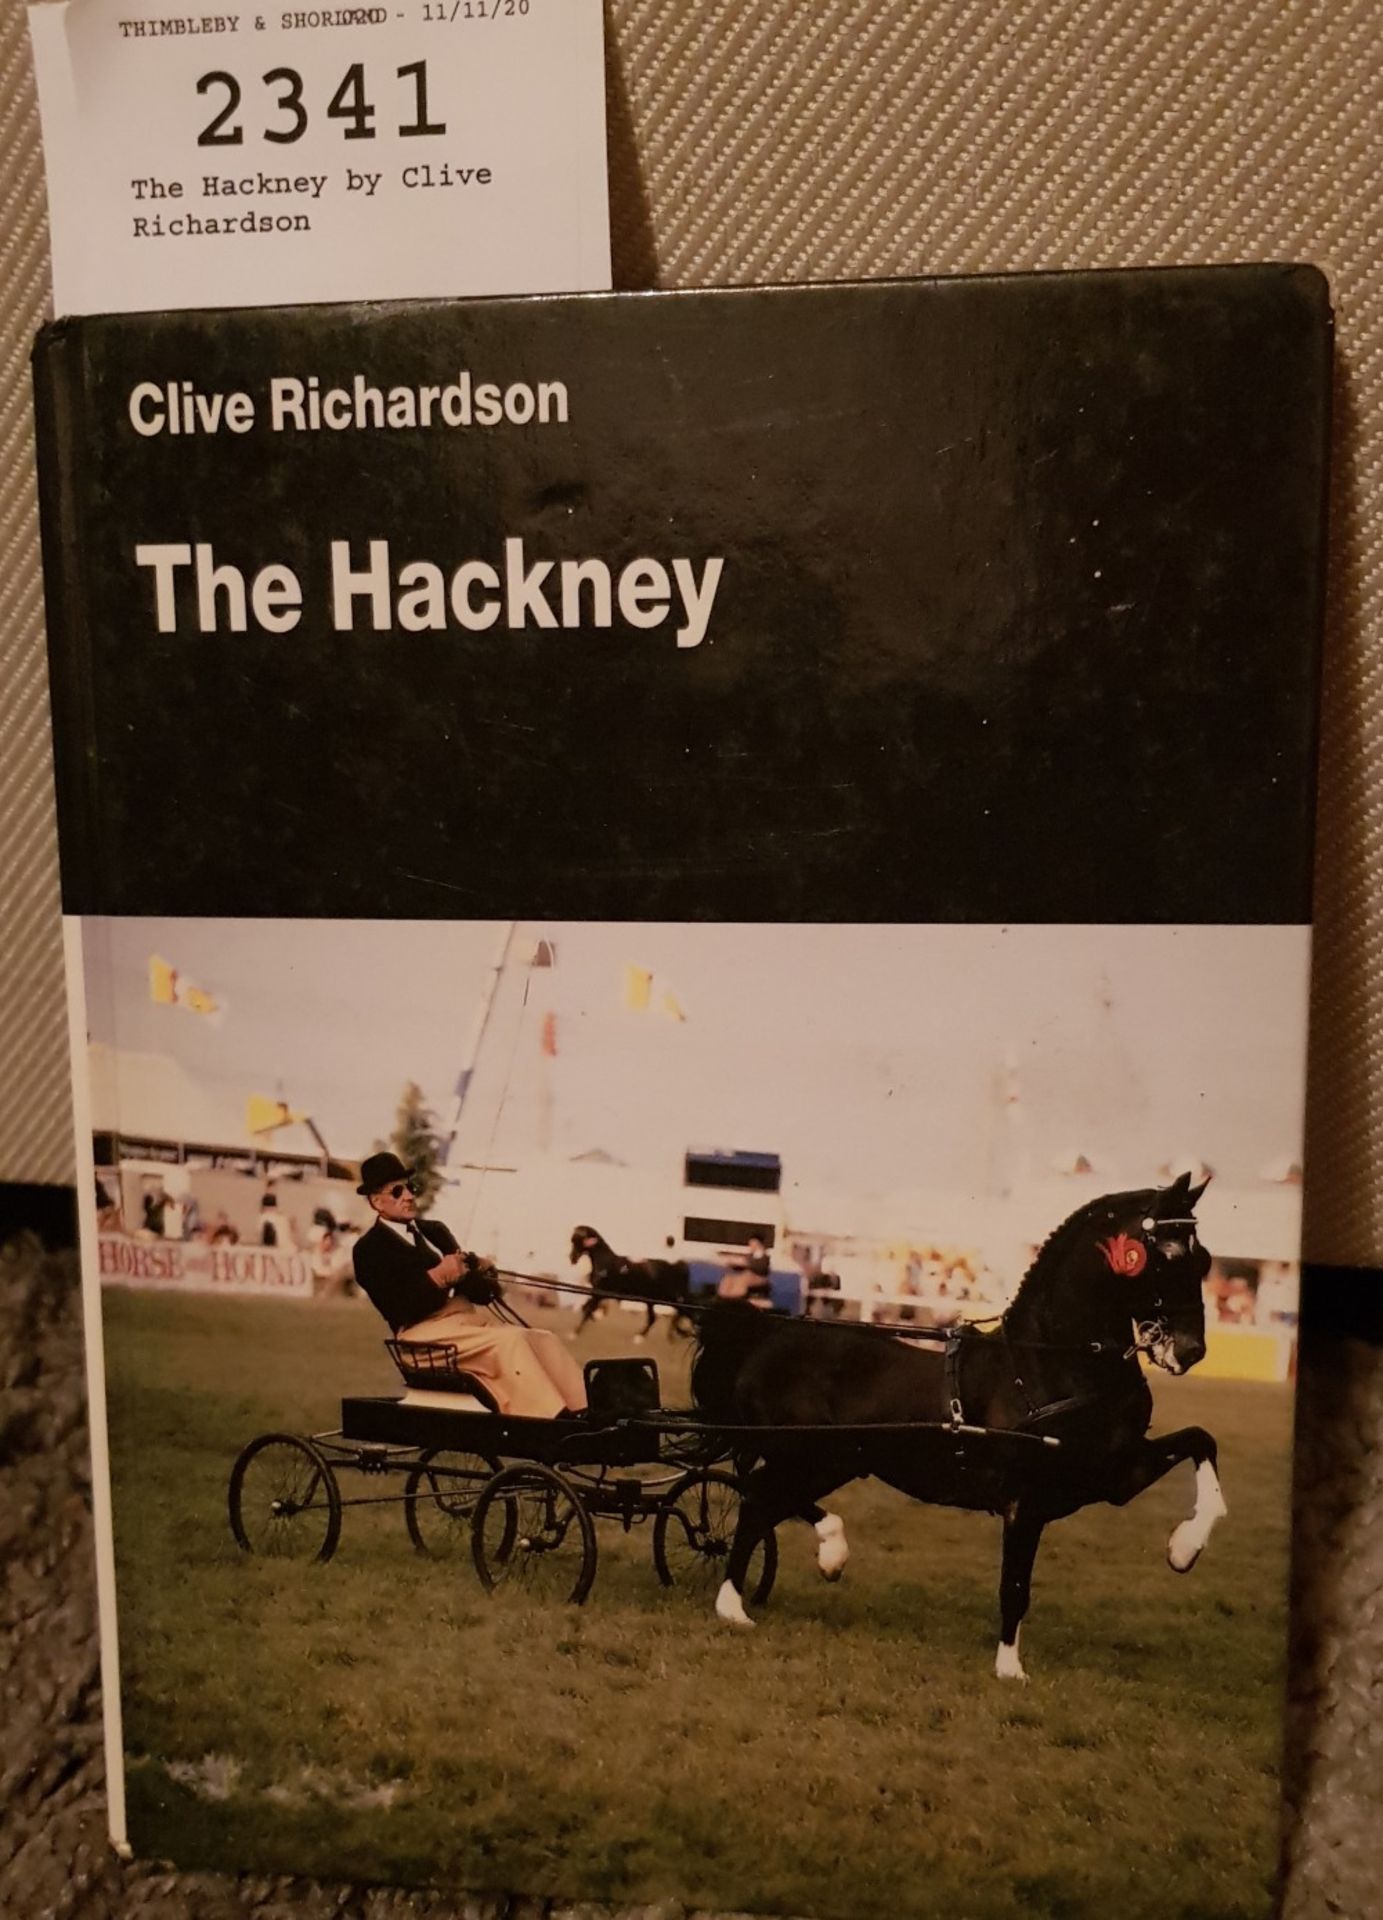 The Hackney by Clive Richardson